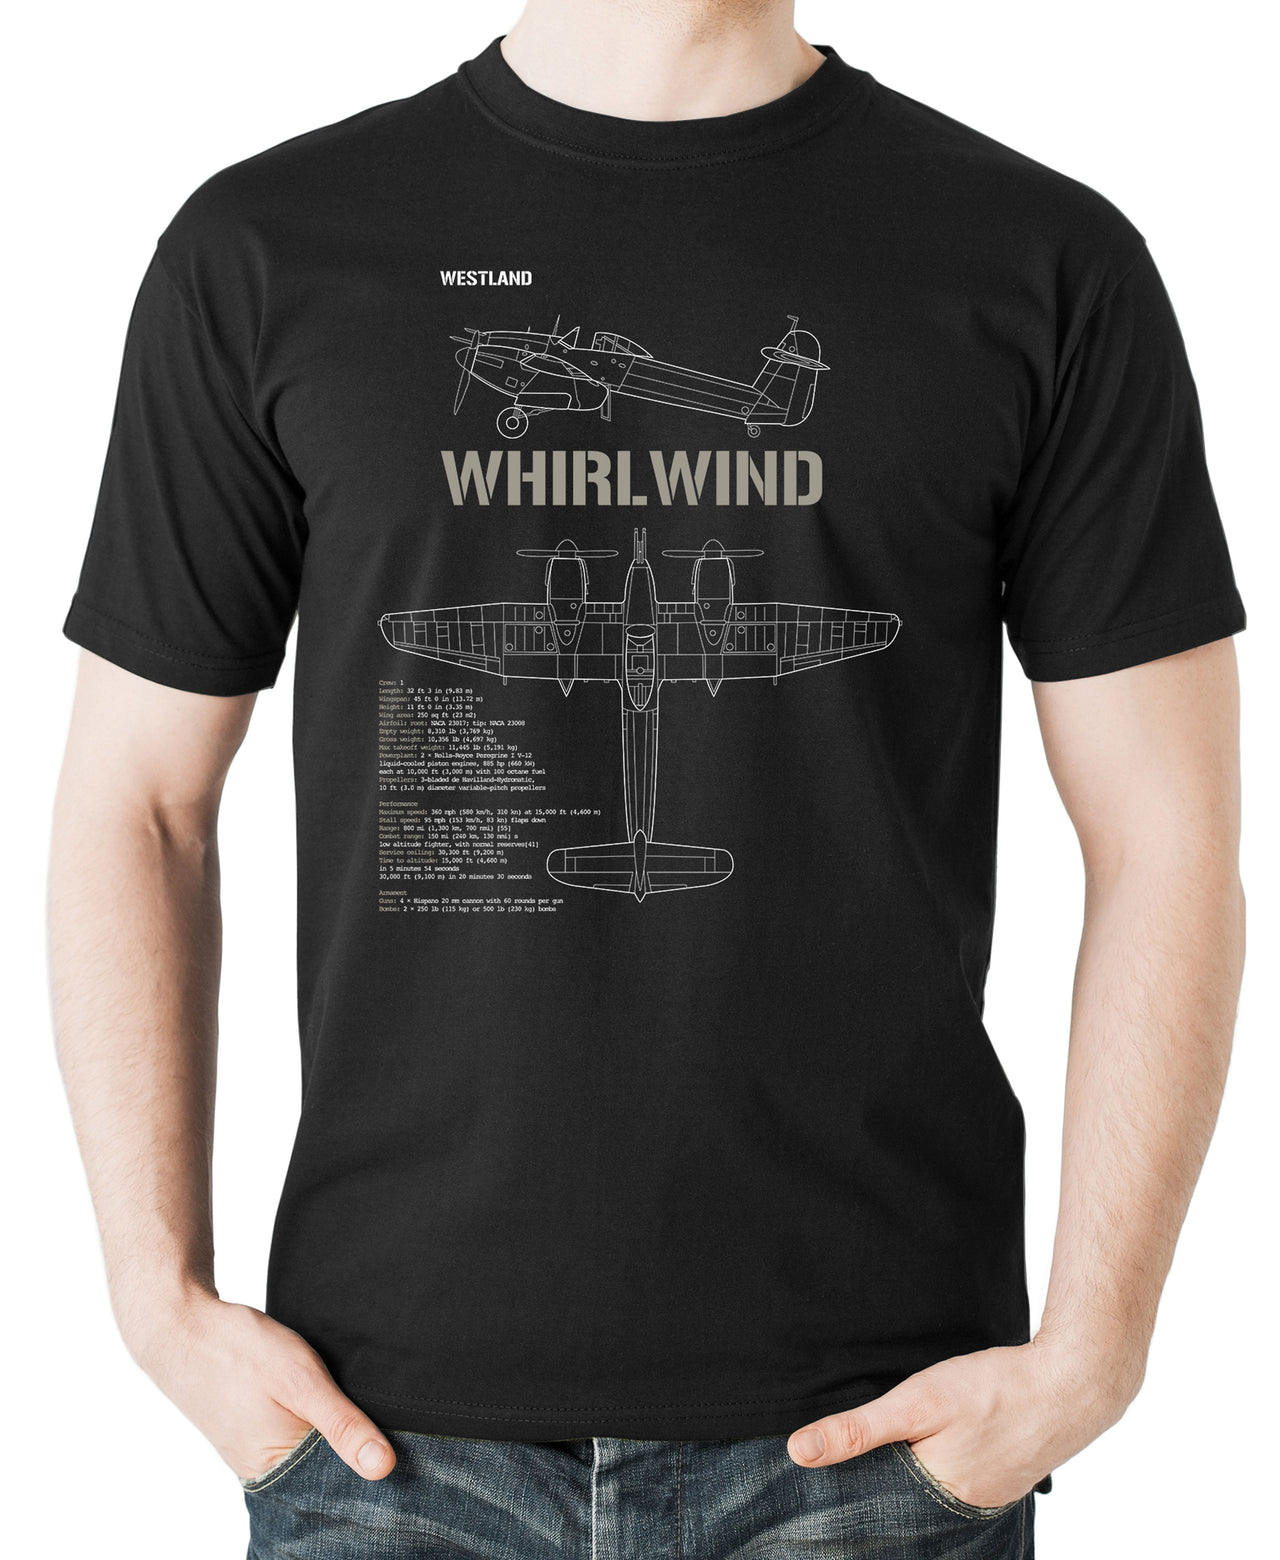 Whirlwind Fighter - T-shirt